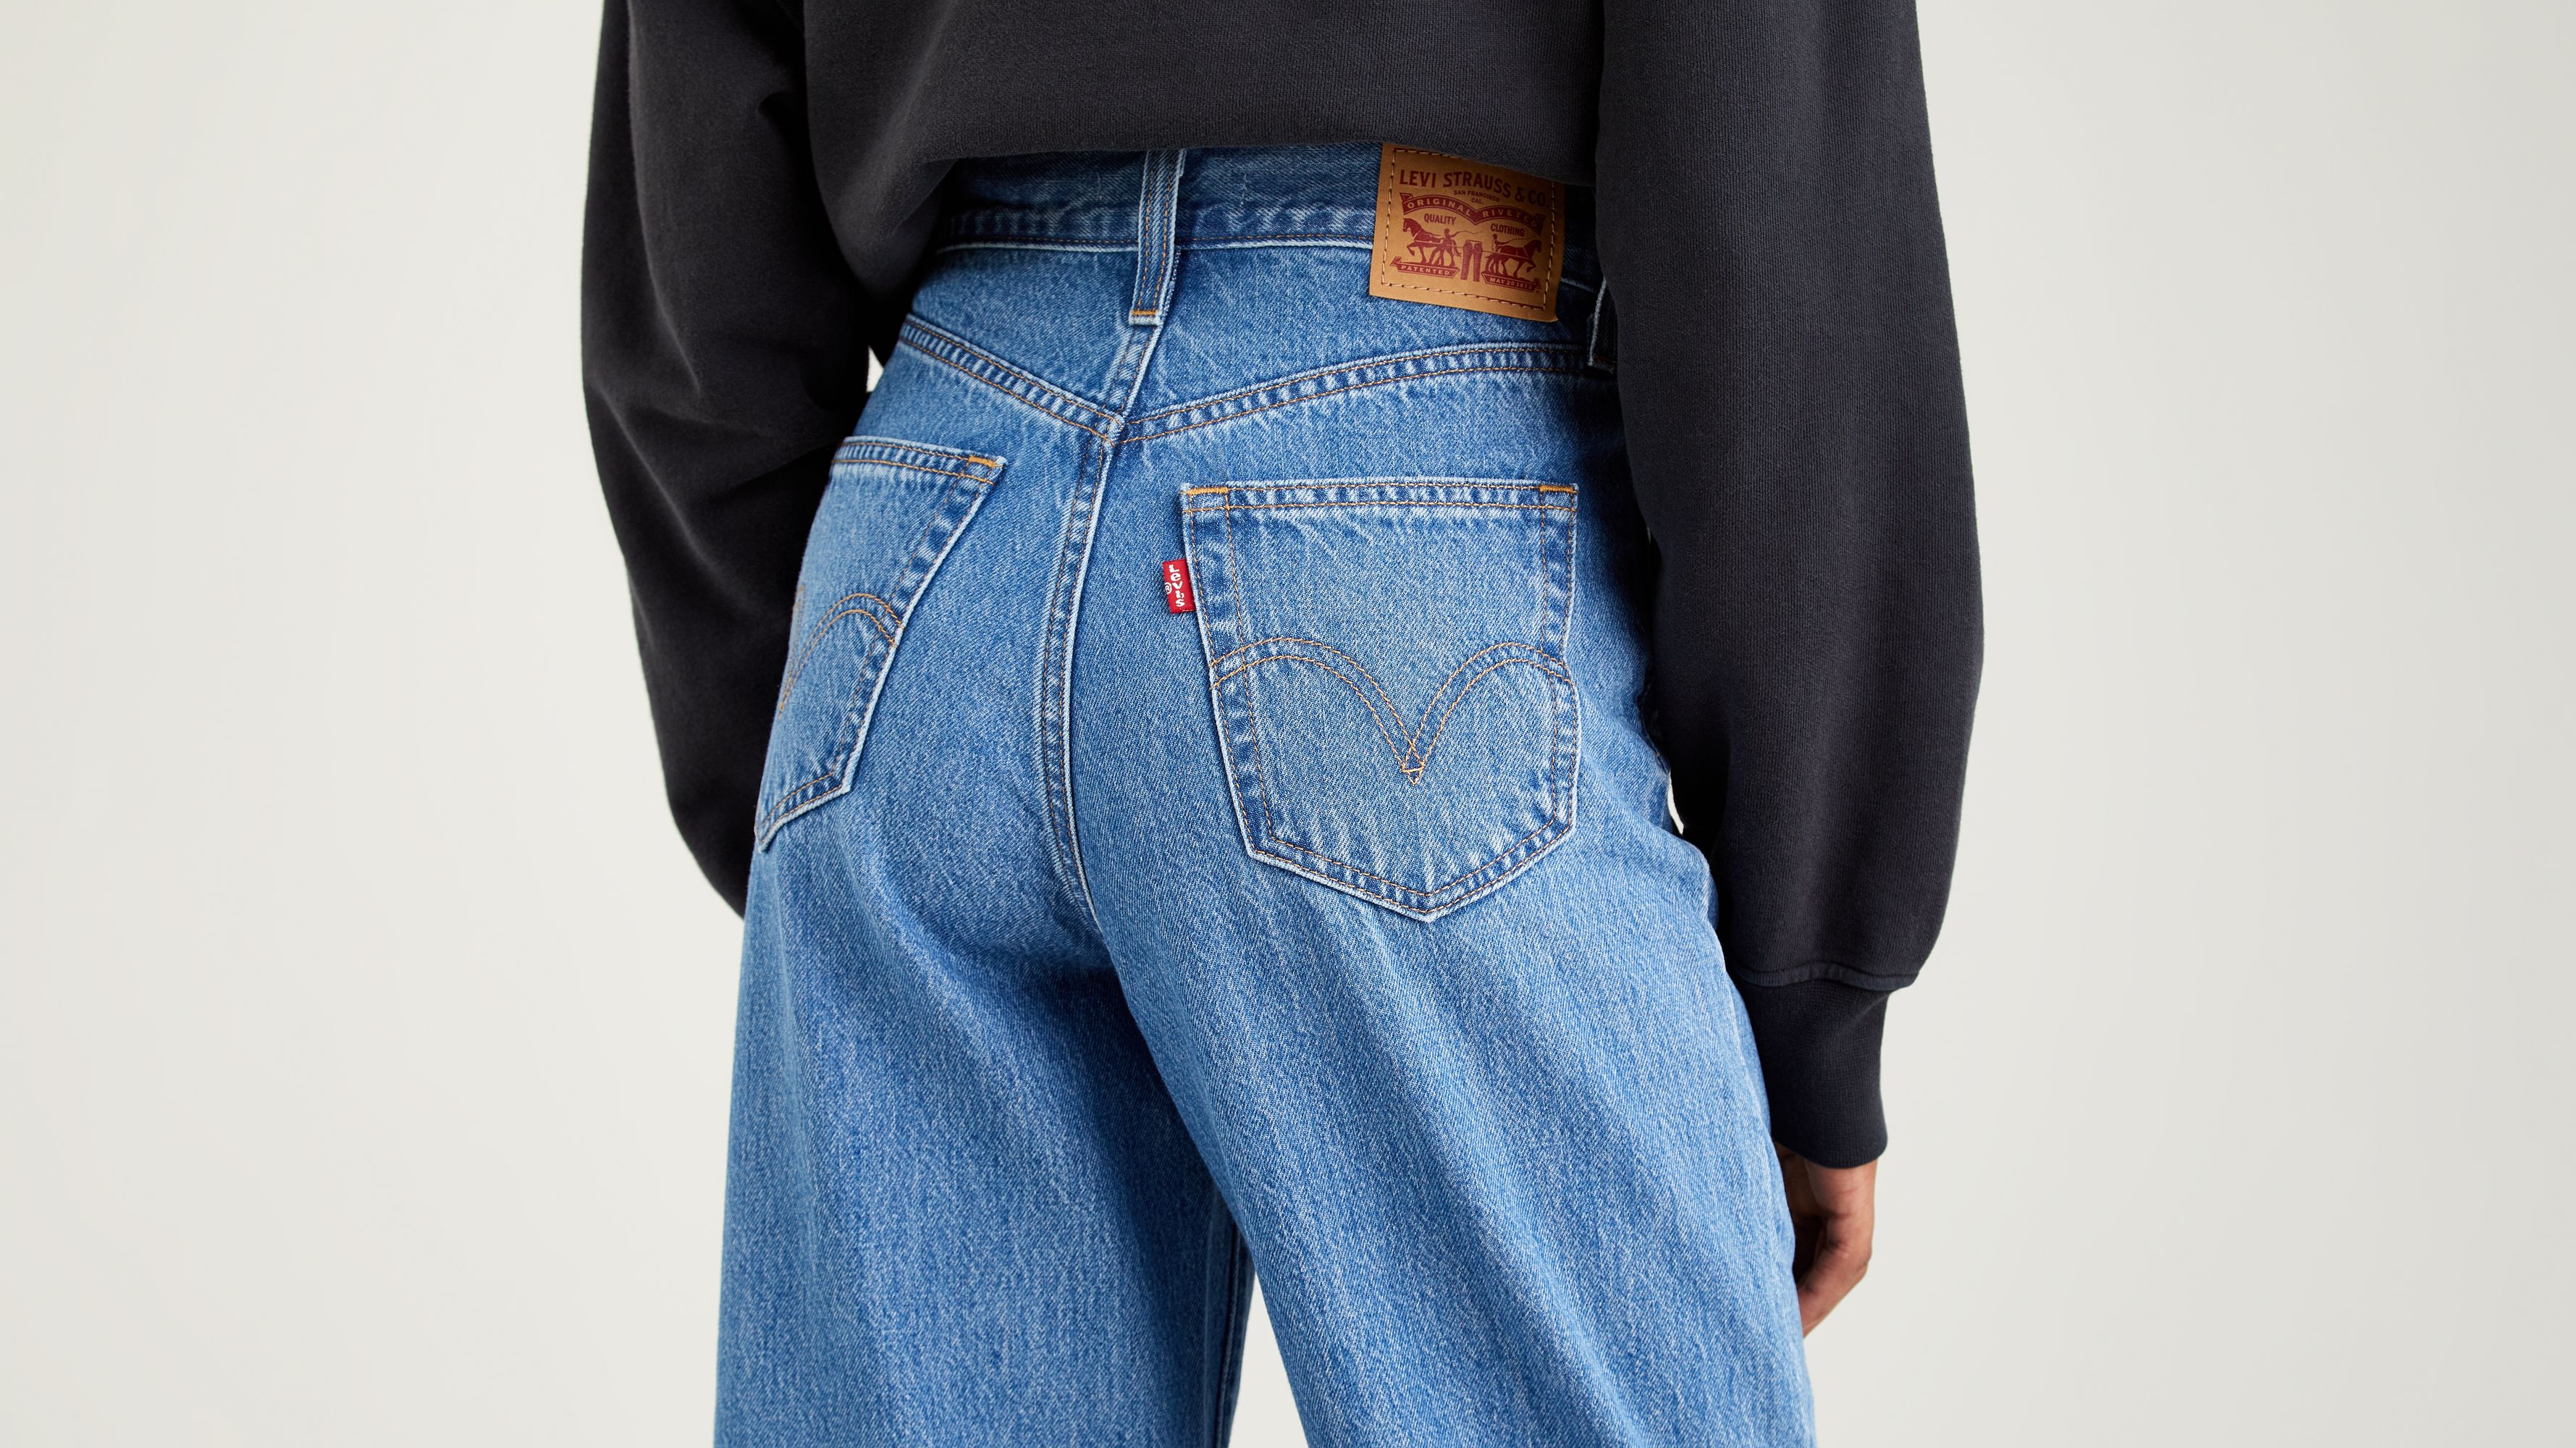 High Waisted Straight Women's Jeans